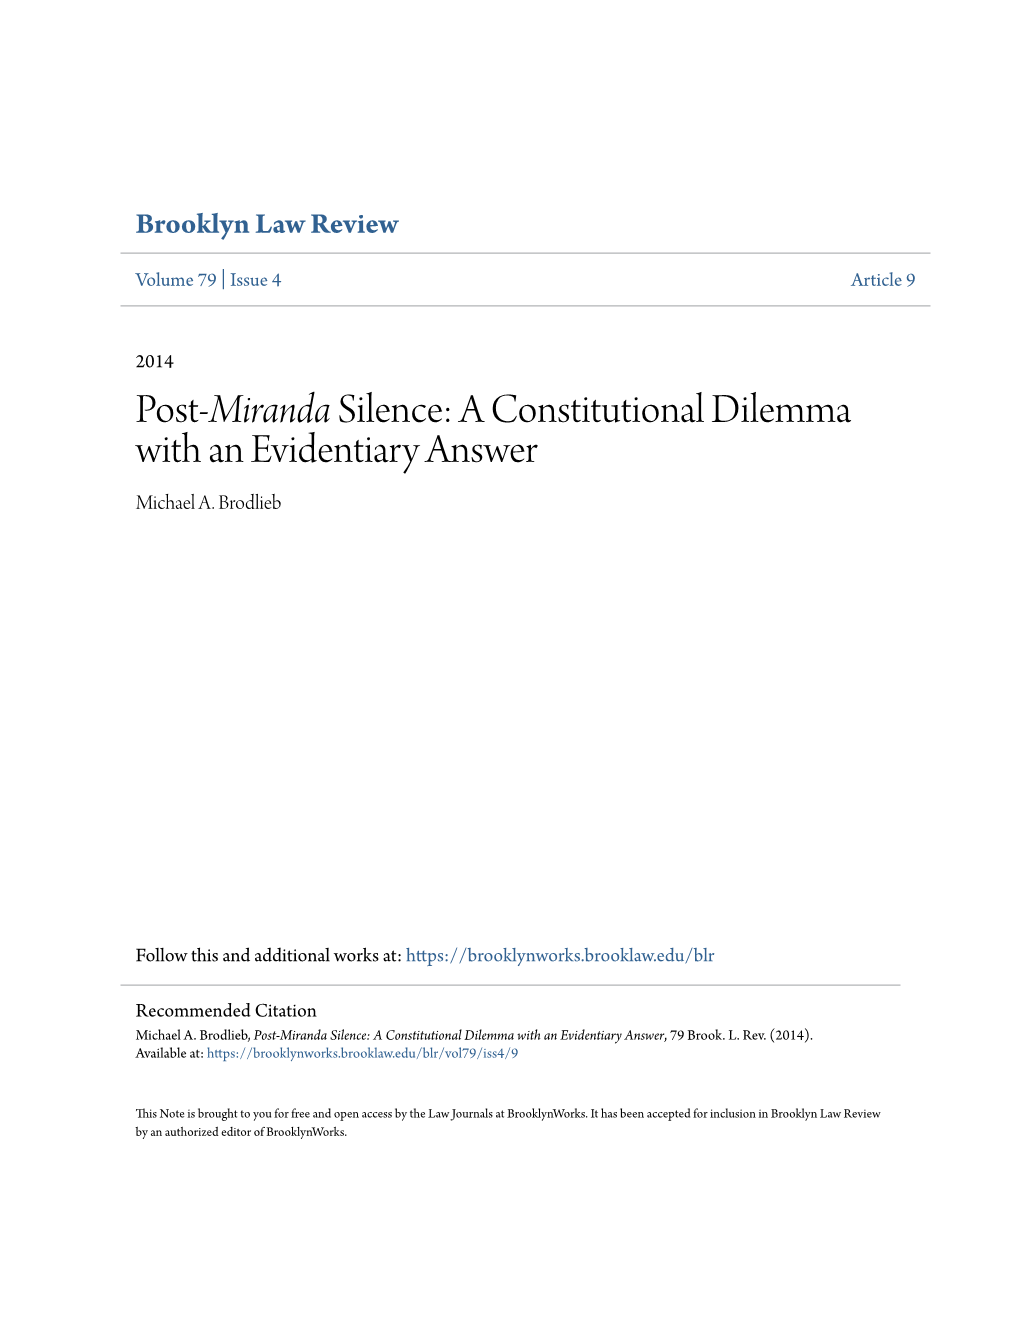 Post-Miranda Silence: a Constitutional Dilemma with an Evidentiary Answer Michael A